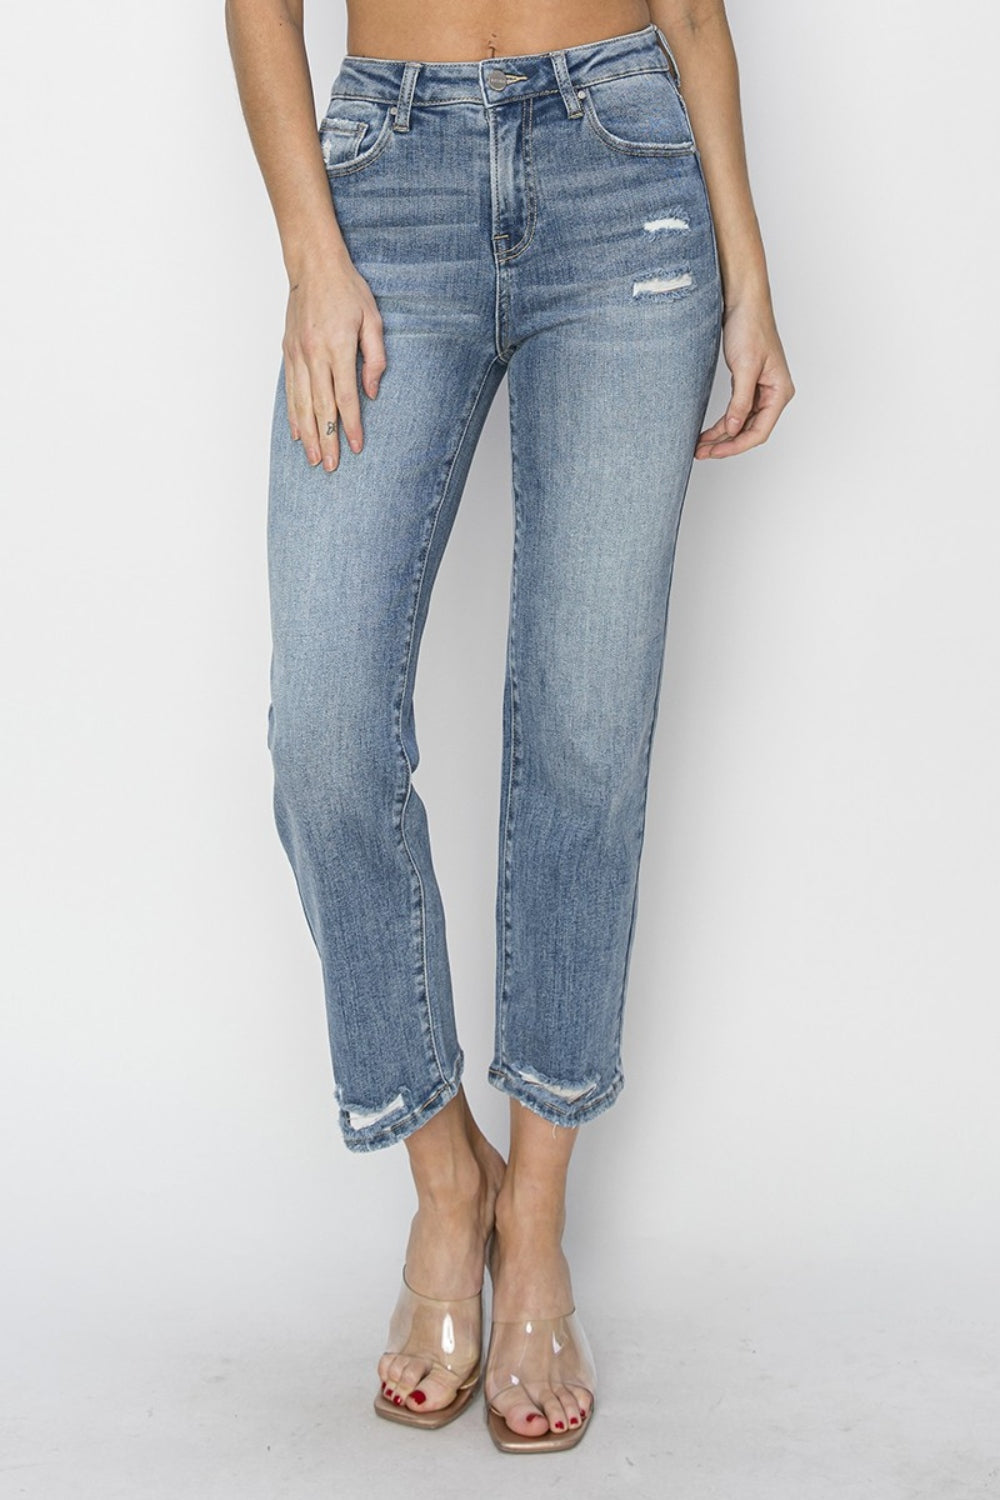 RISEN High Rise Cropped Jeans - Inspired Eye Boutique